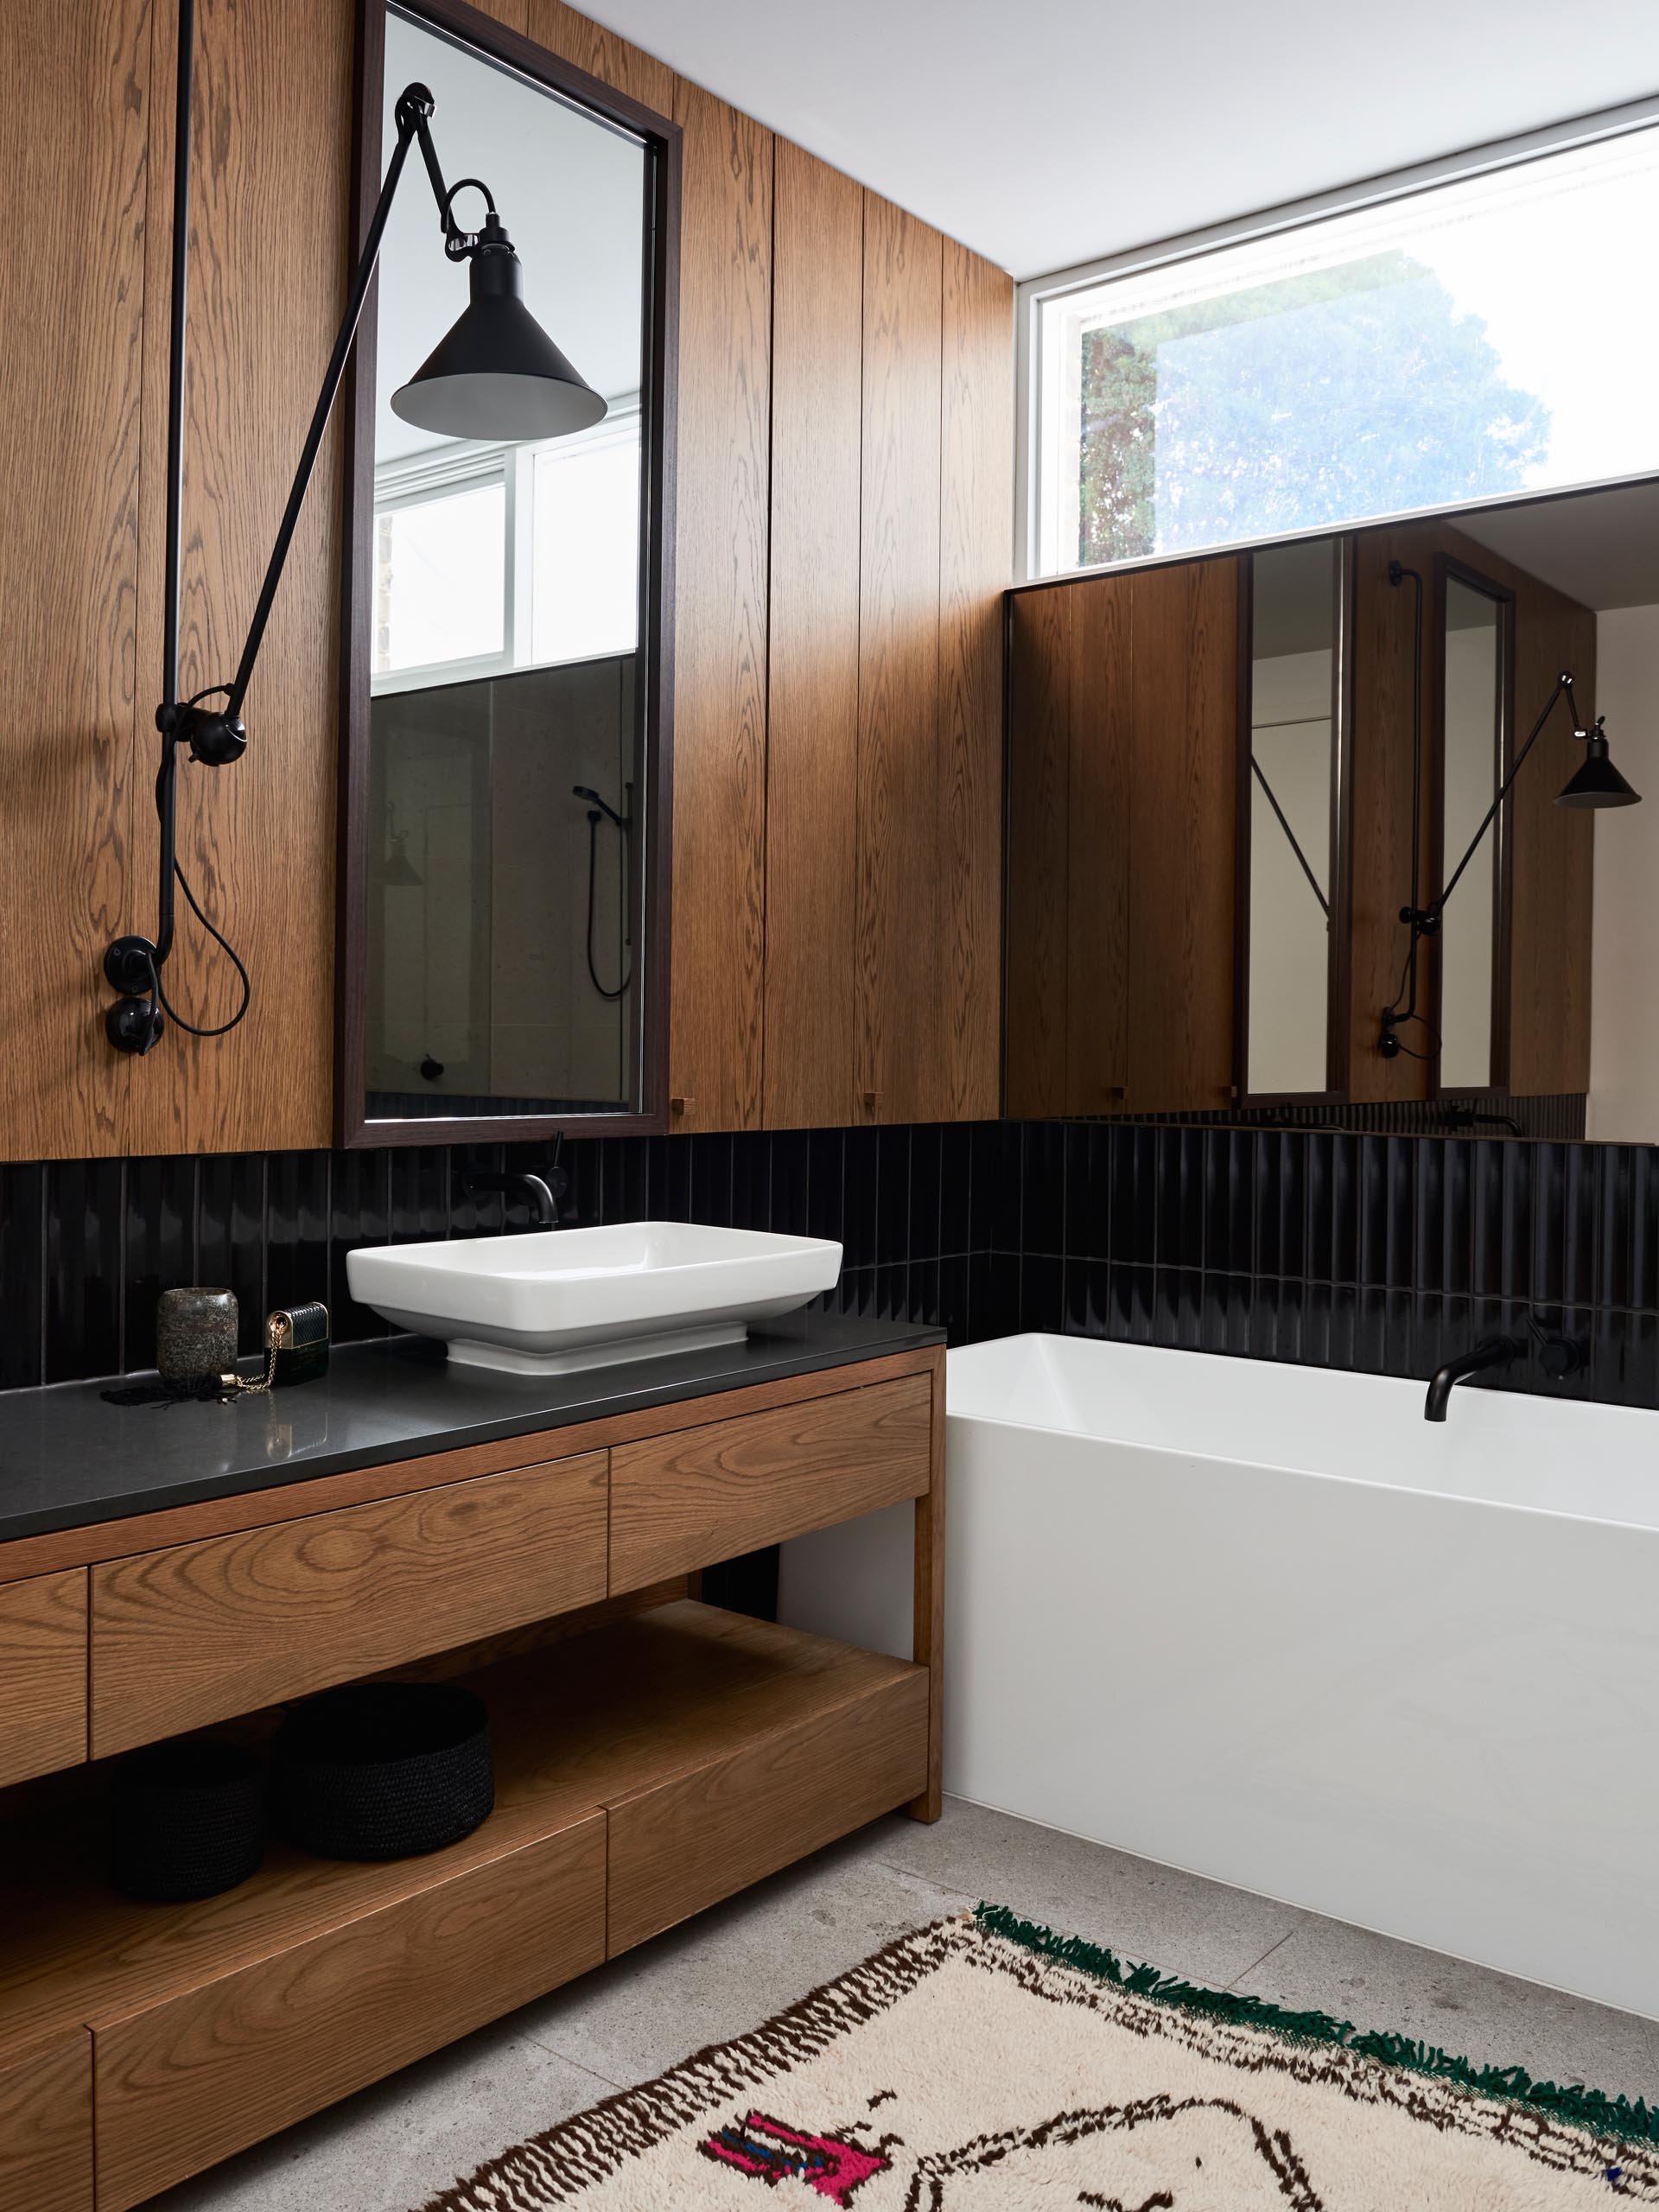 In this modern bathroom, wood paneling and a wood vanity have been paired with black tiles, a white vanity, and white bathtub.